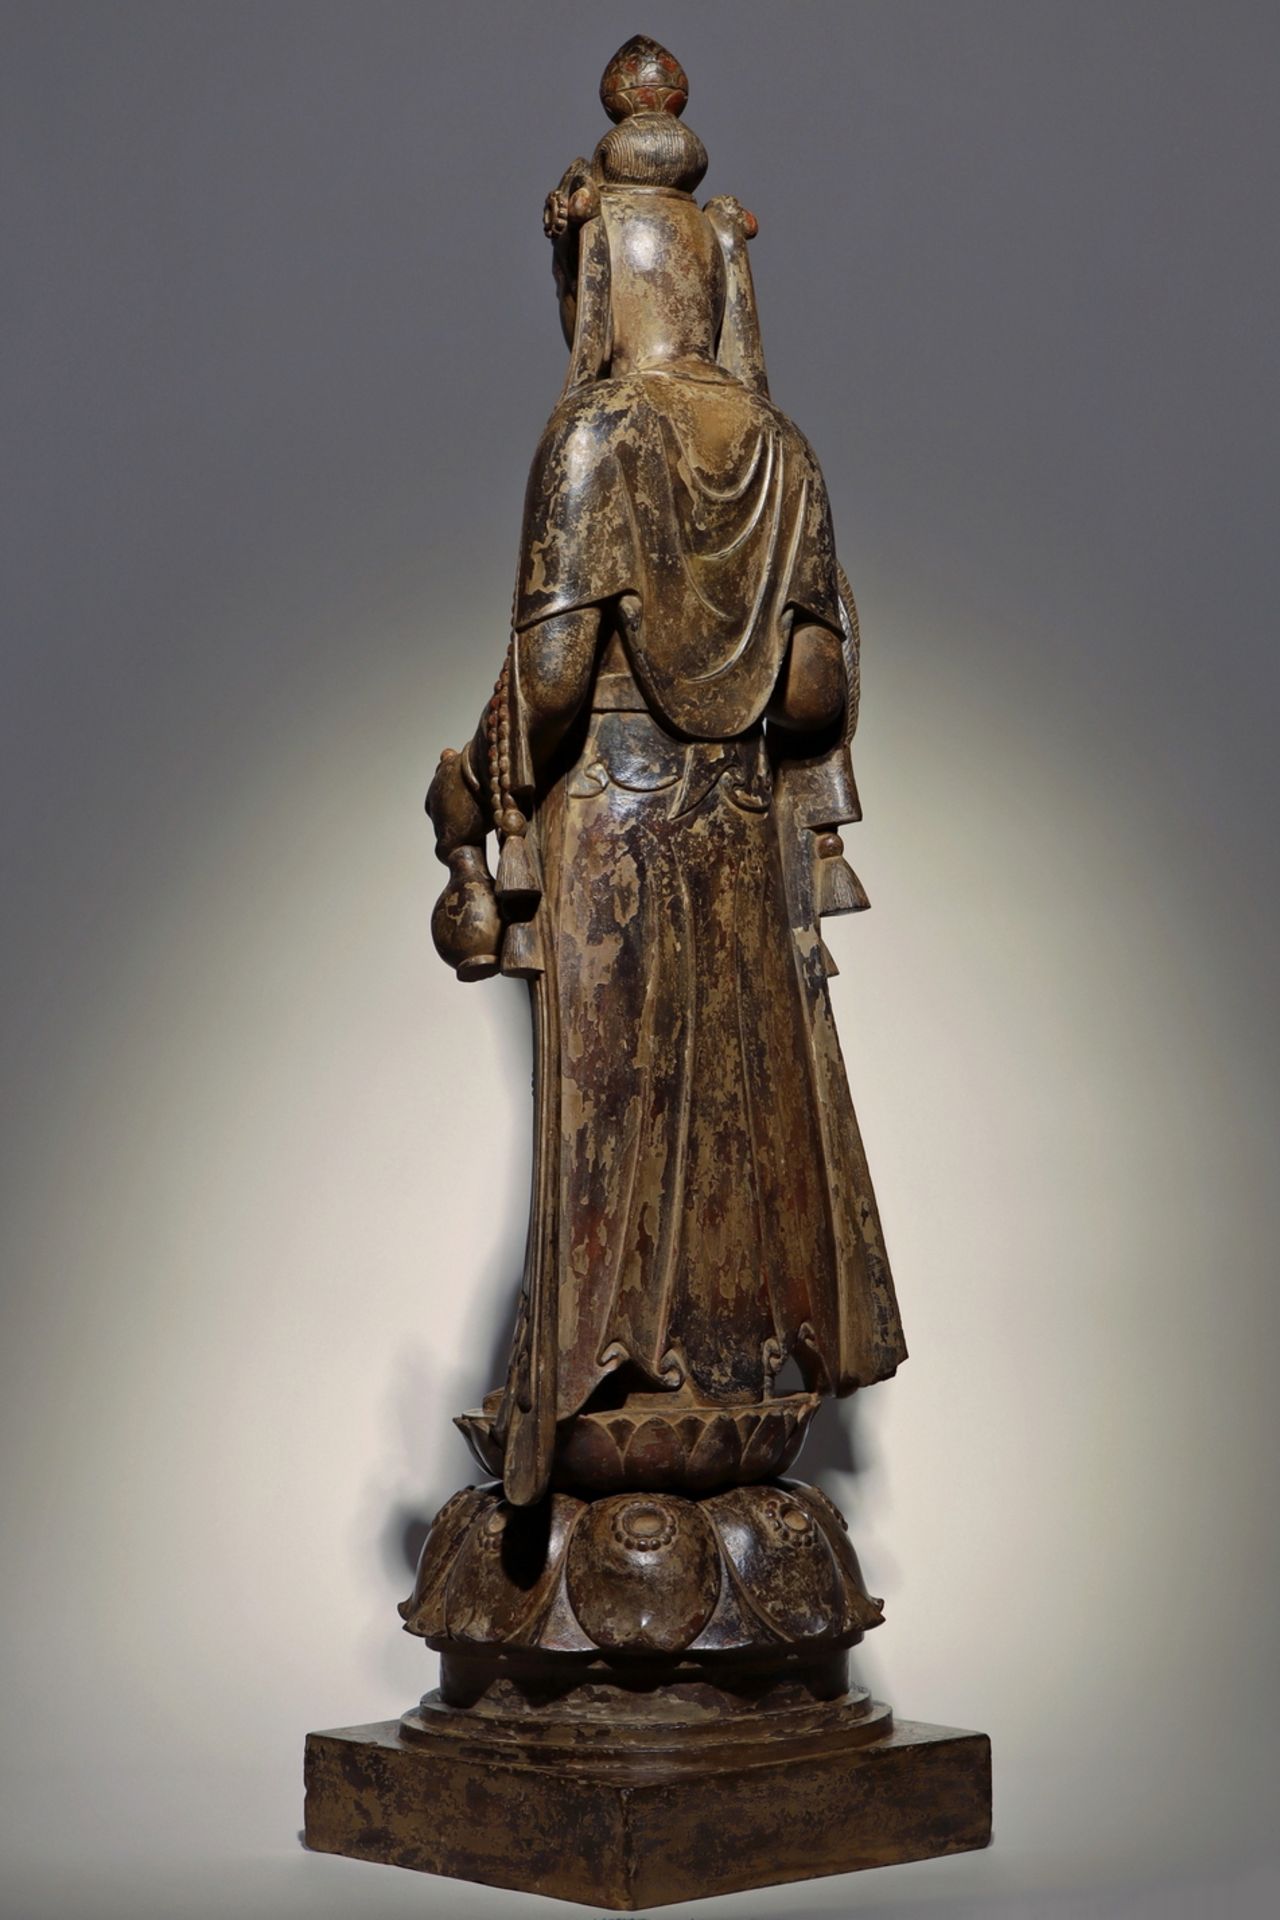 A Chinese stone sculpture, 14TH Century earlier Pr. Collection of NARA private gallary. - Image 9 of 9